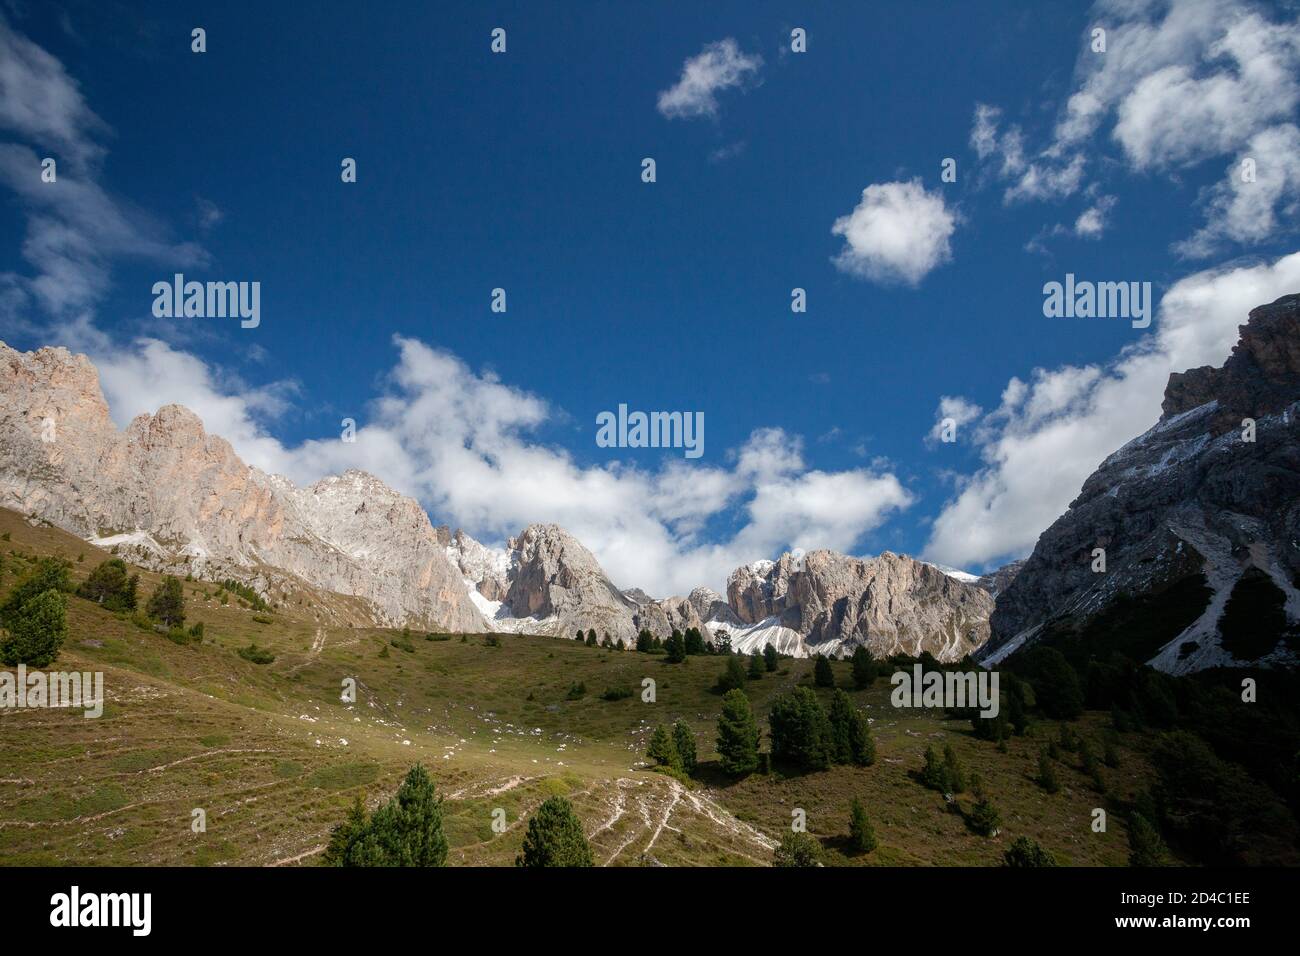 Views of hiking trails and trees, with the peaks of the Geisler group of mountains in the Italian Dolomites, in the Alps, South Tyrol, Italy Stock Photo